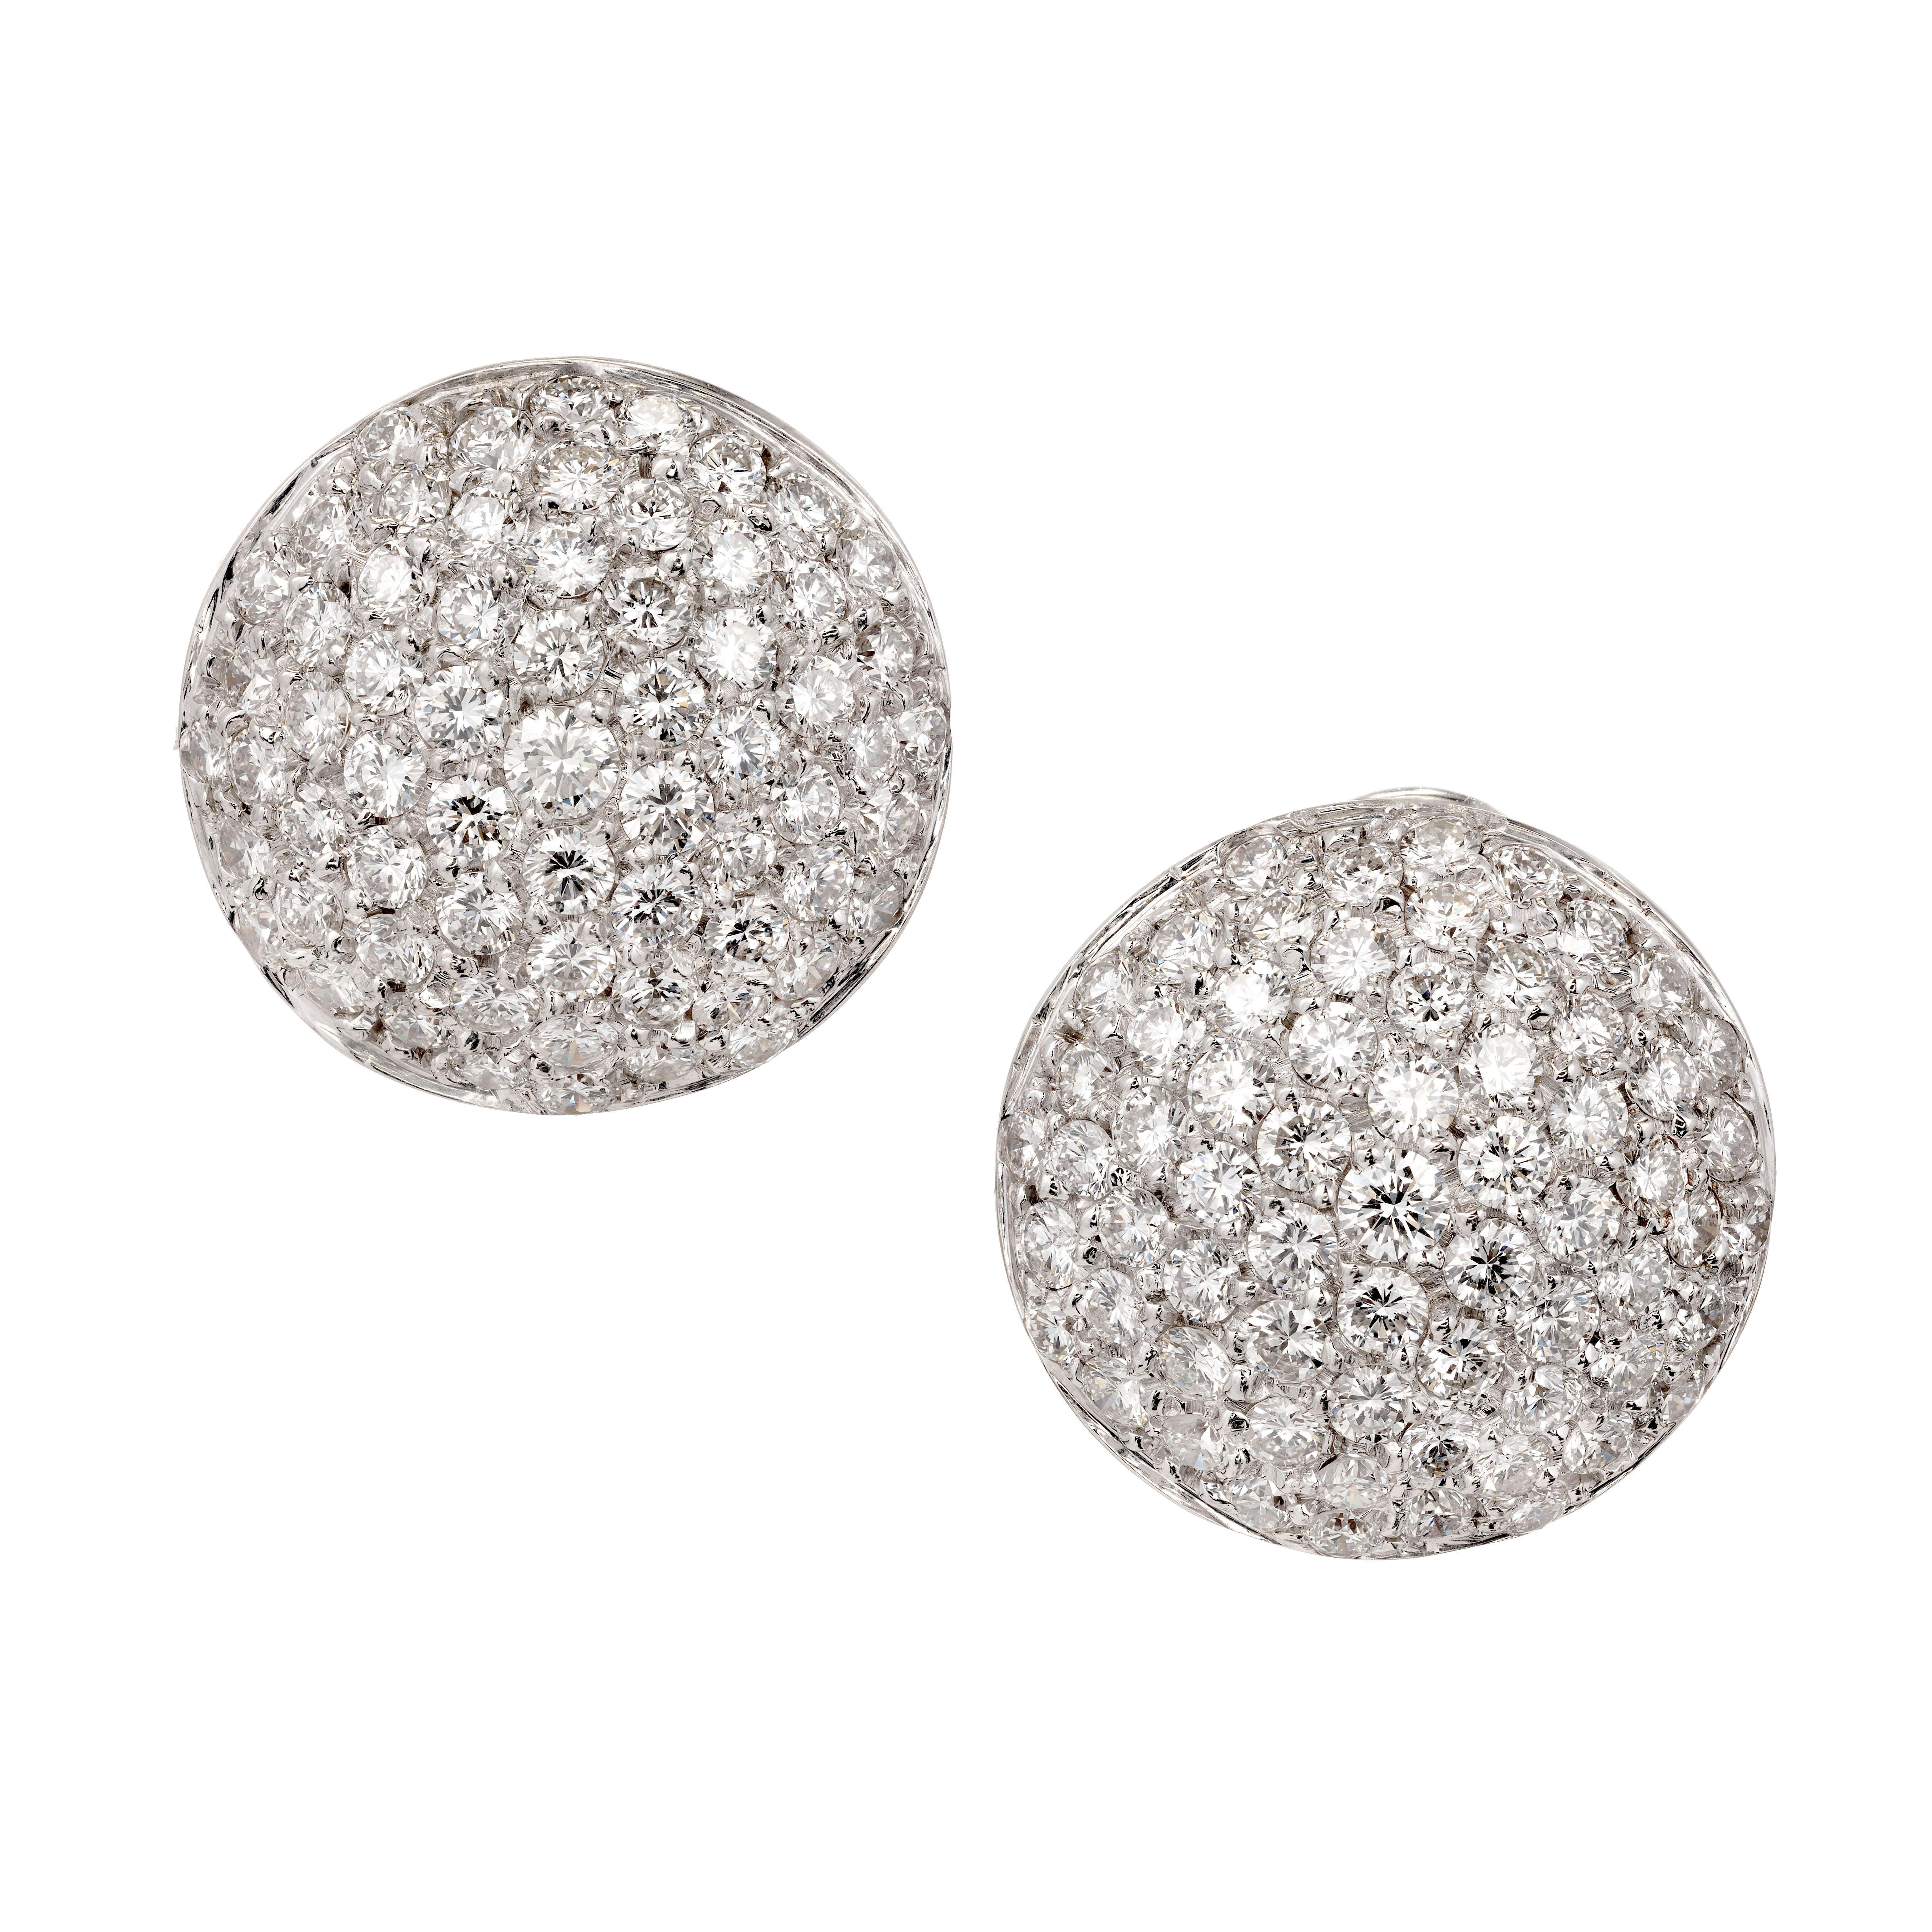 3.56 Carat Diamond Dome Cluster Gold Earrings